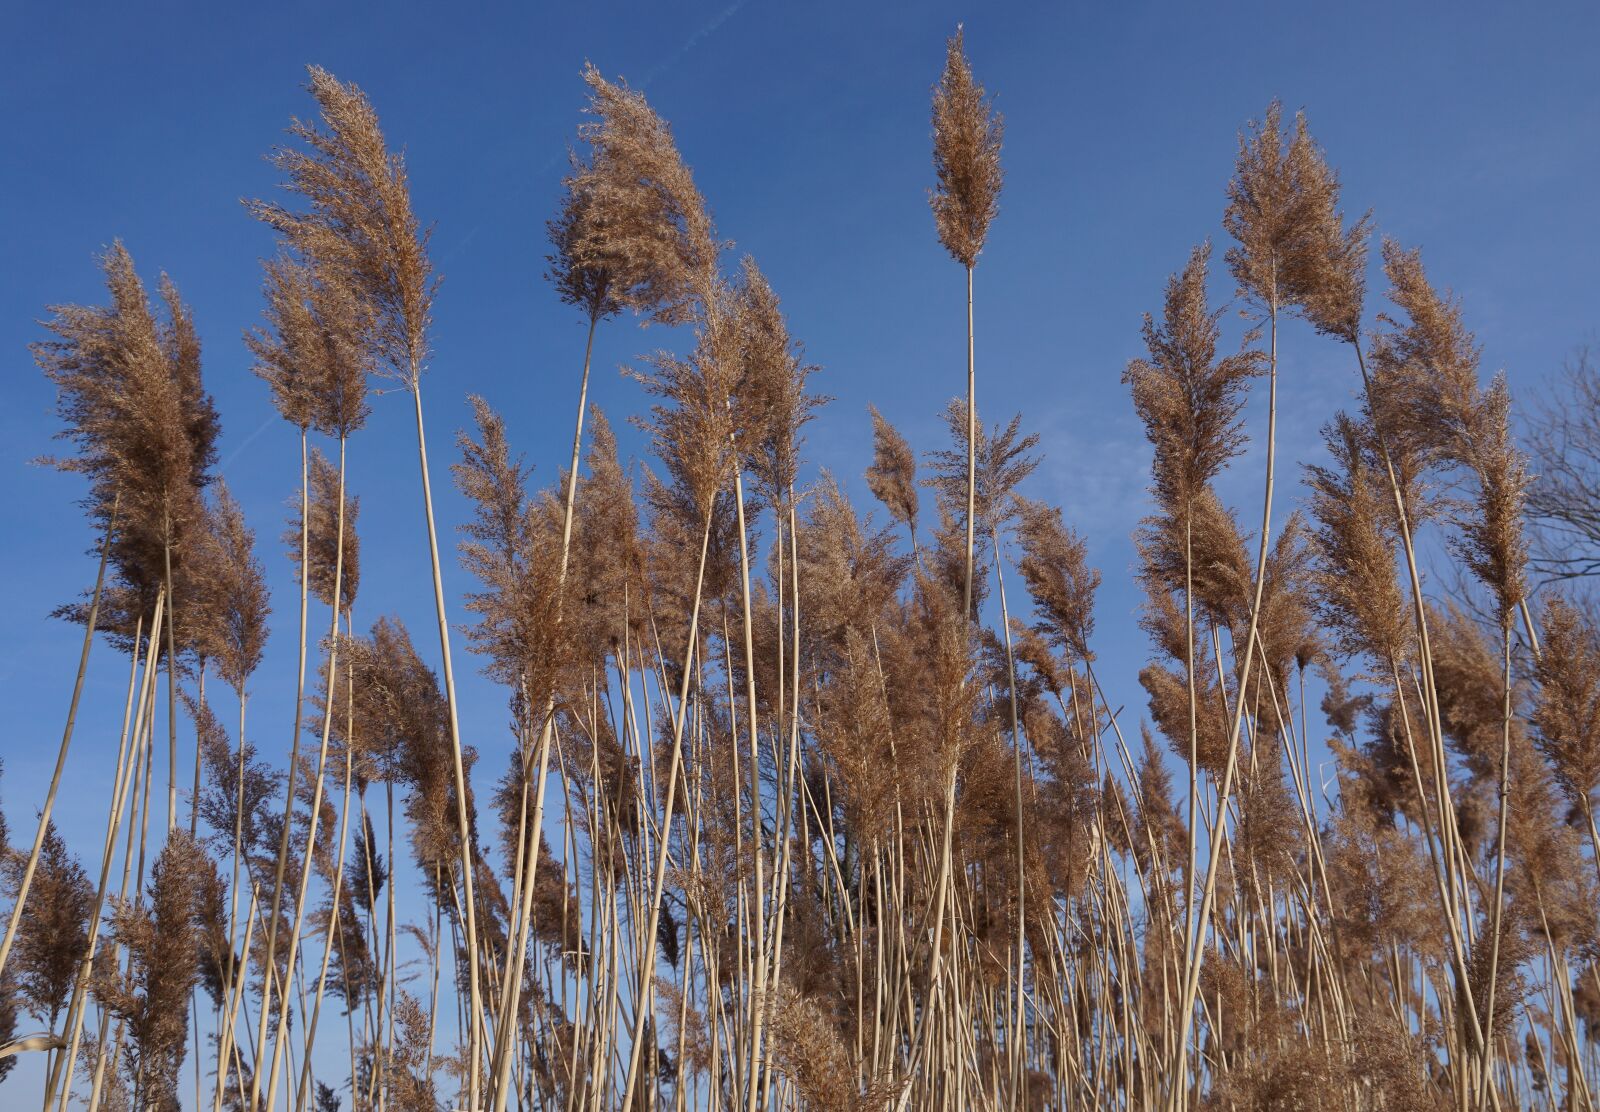 Sony a5100 sample photo. Reed, nature, sky photography